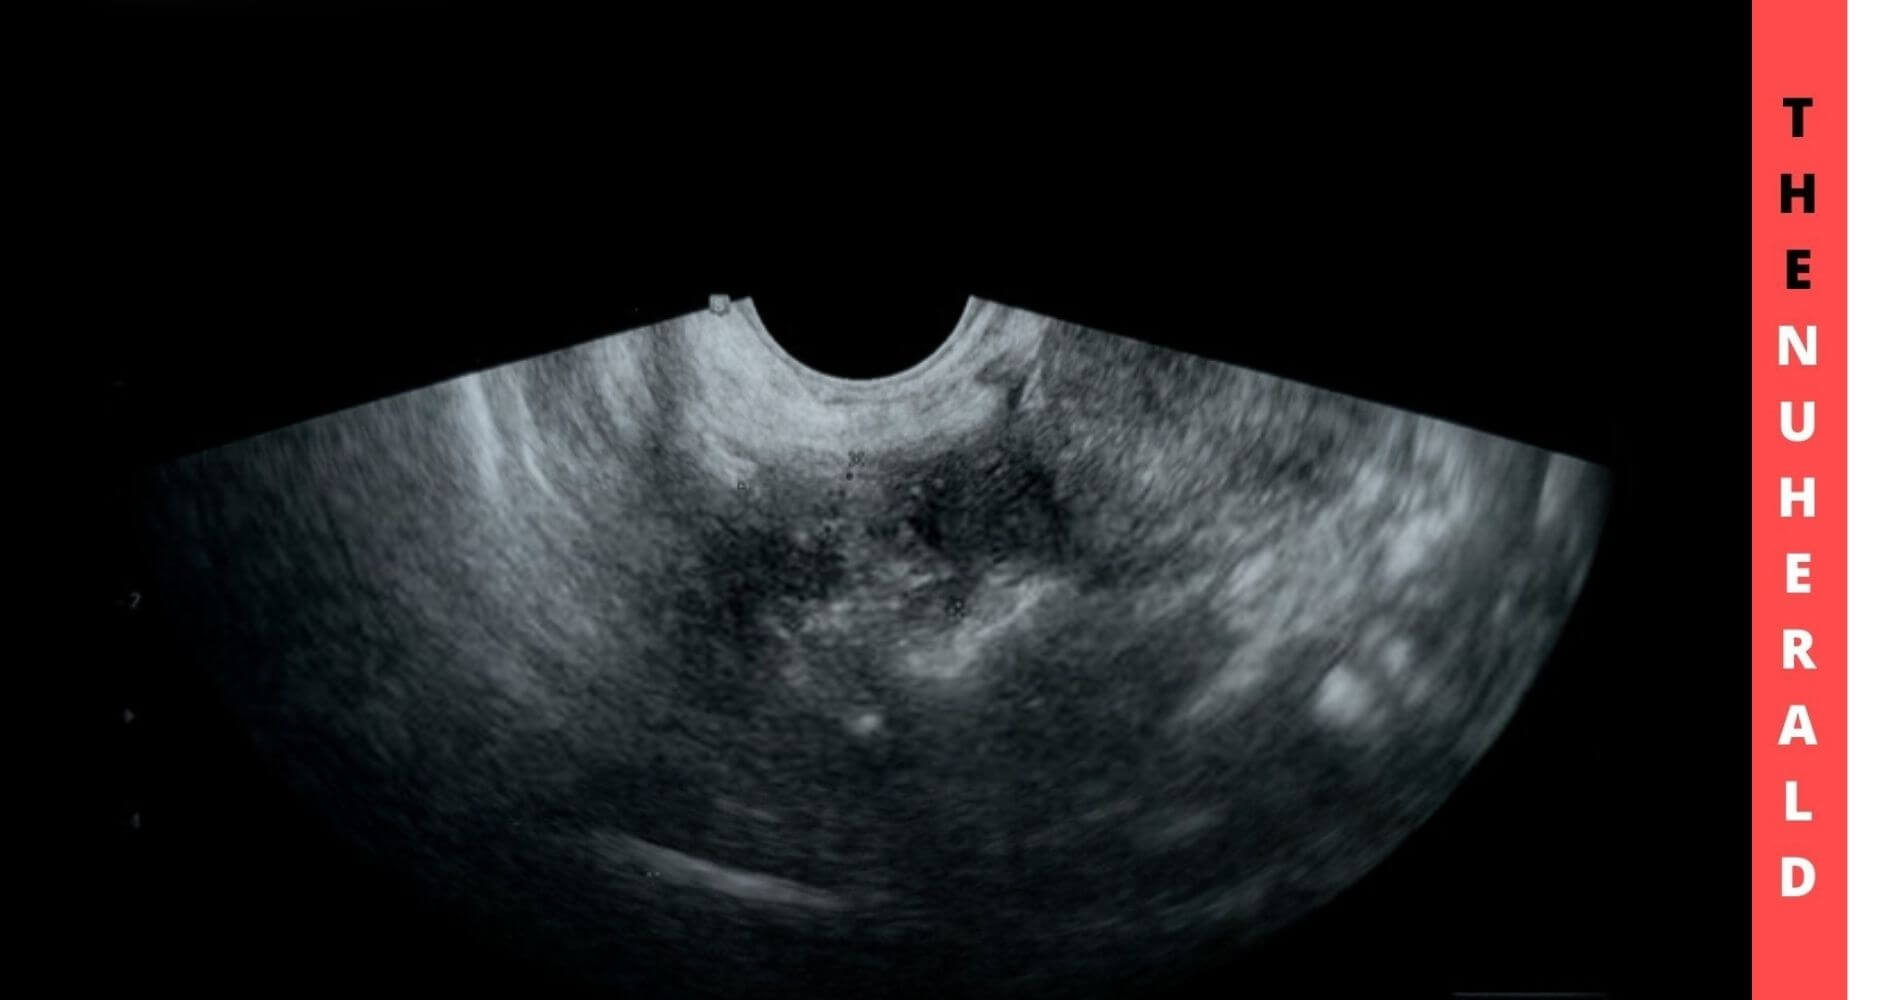 Better-Cancer-Diagnosis-With-Improved-Ultrasound-Technology